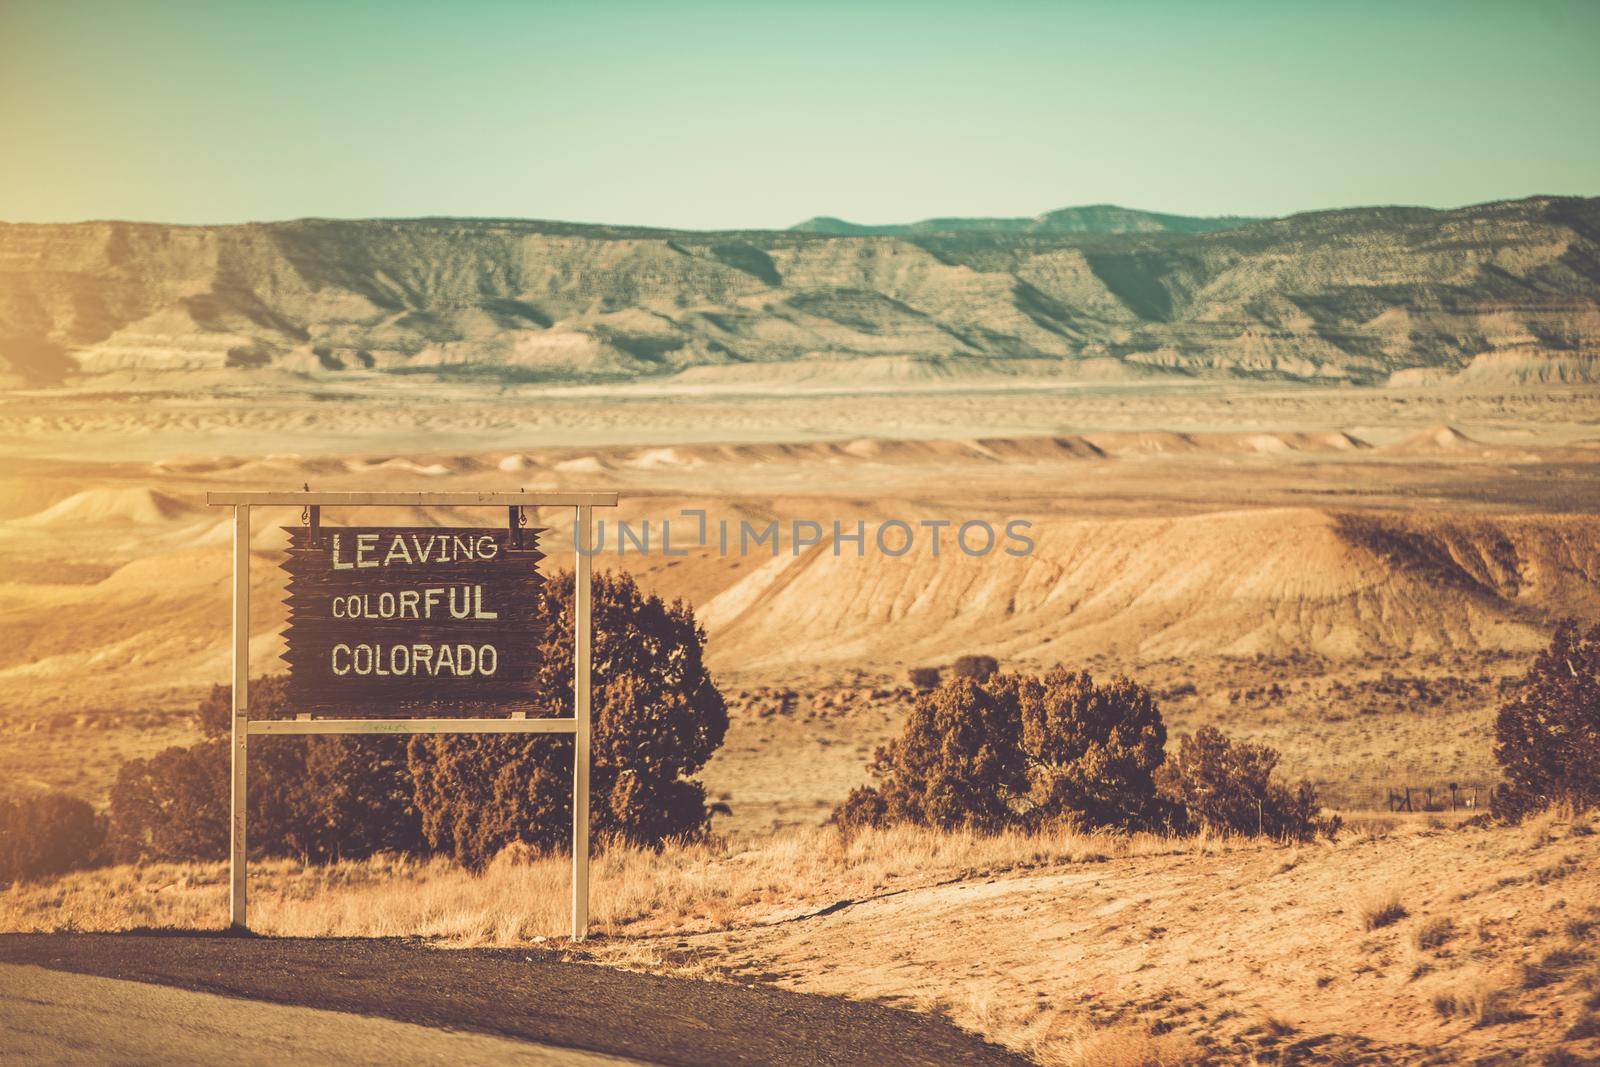 Leaving Colorful Colorado Utah State Border Wooden Sign, United States of America.